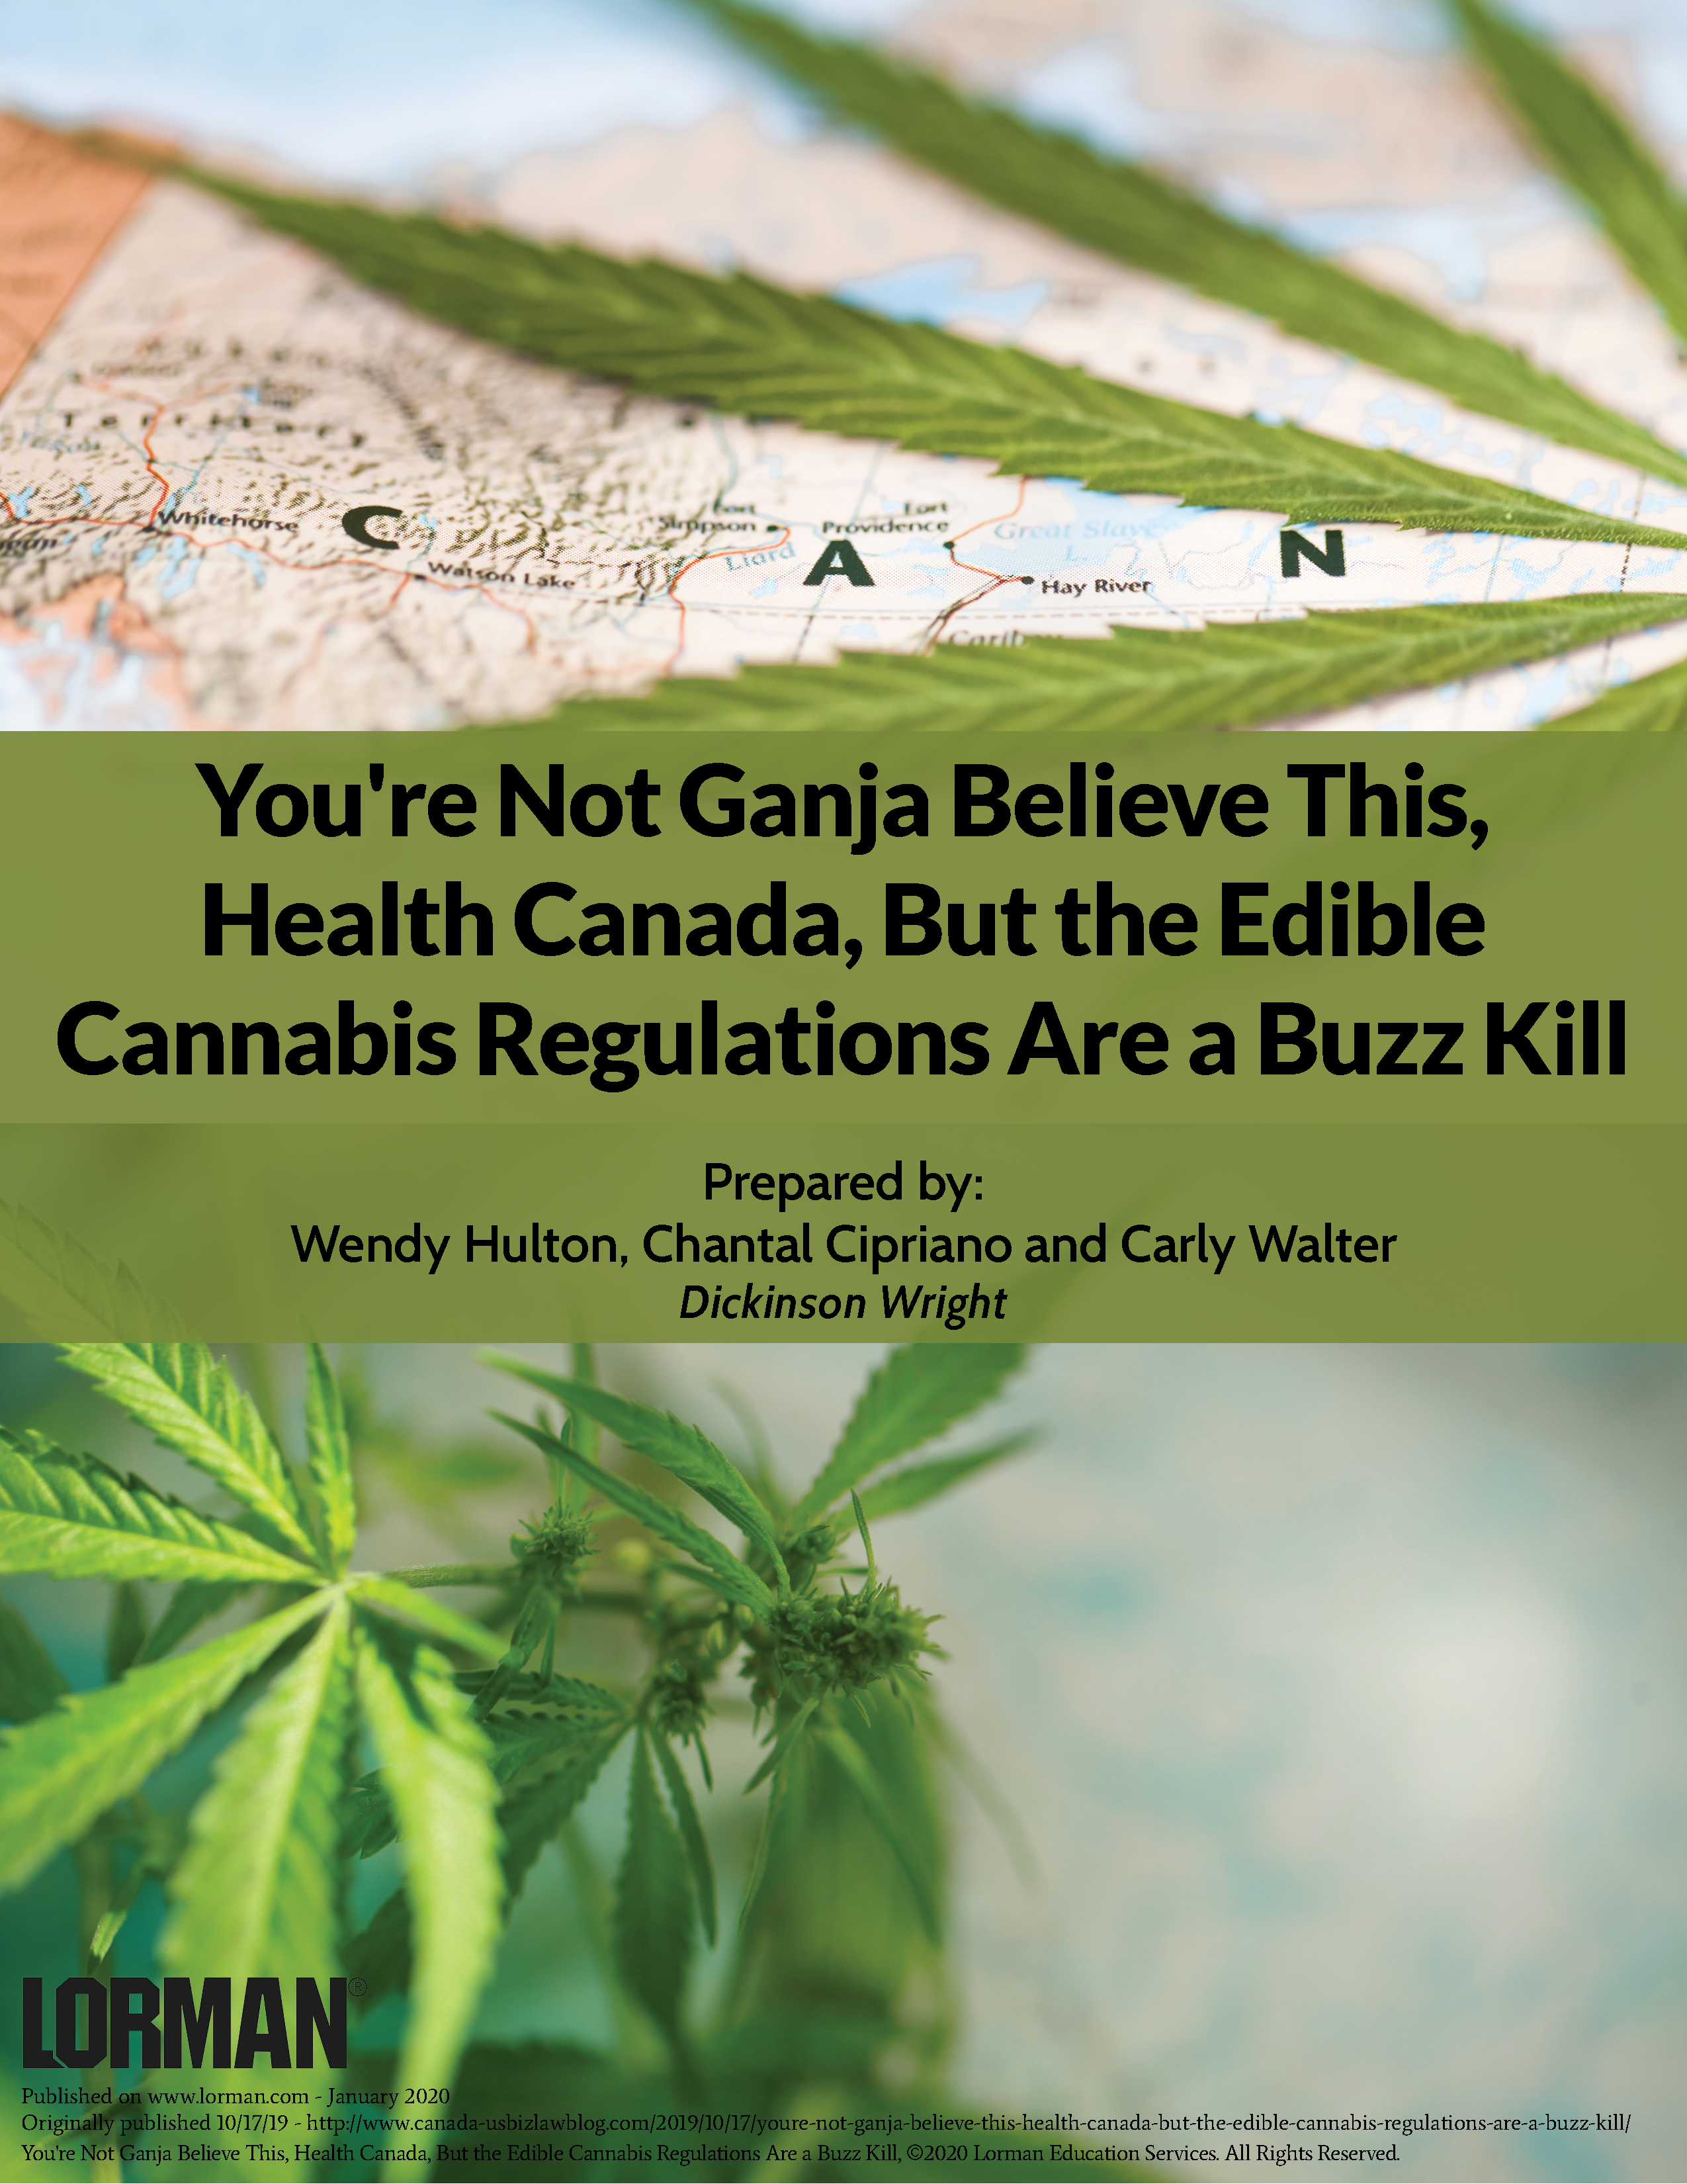 You're Not Ganja Believe This, Health Canada, But the Edible Cannabis Regulations Are a Buzz Kill